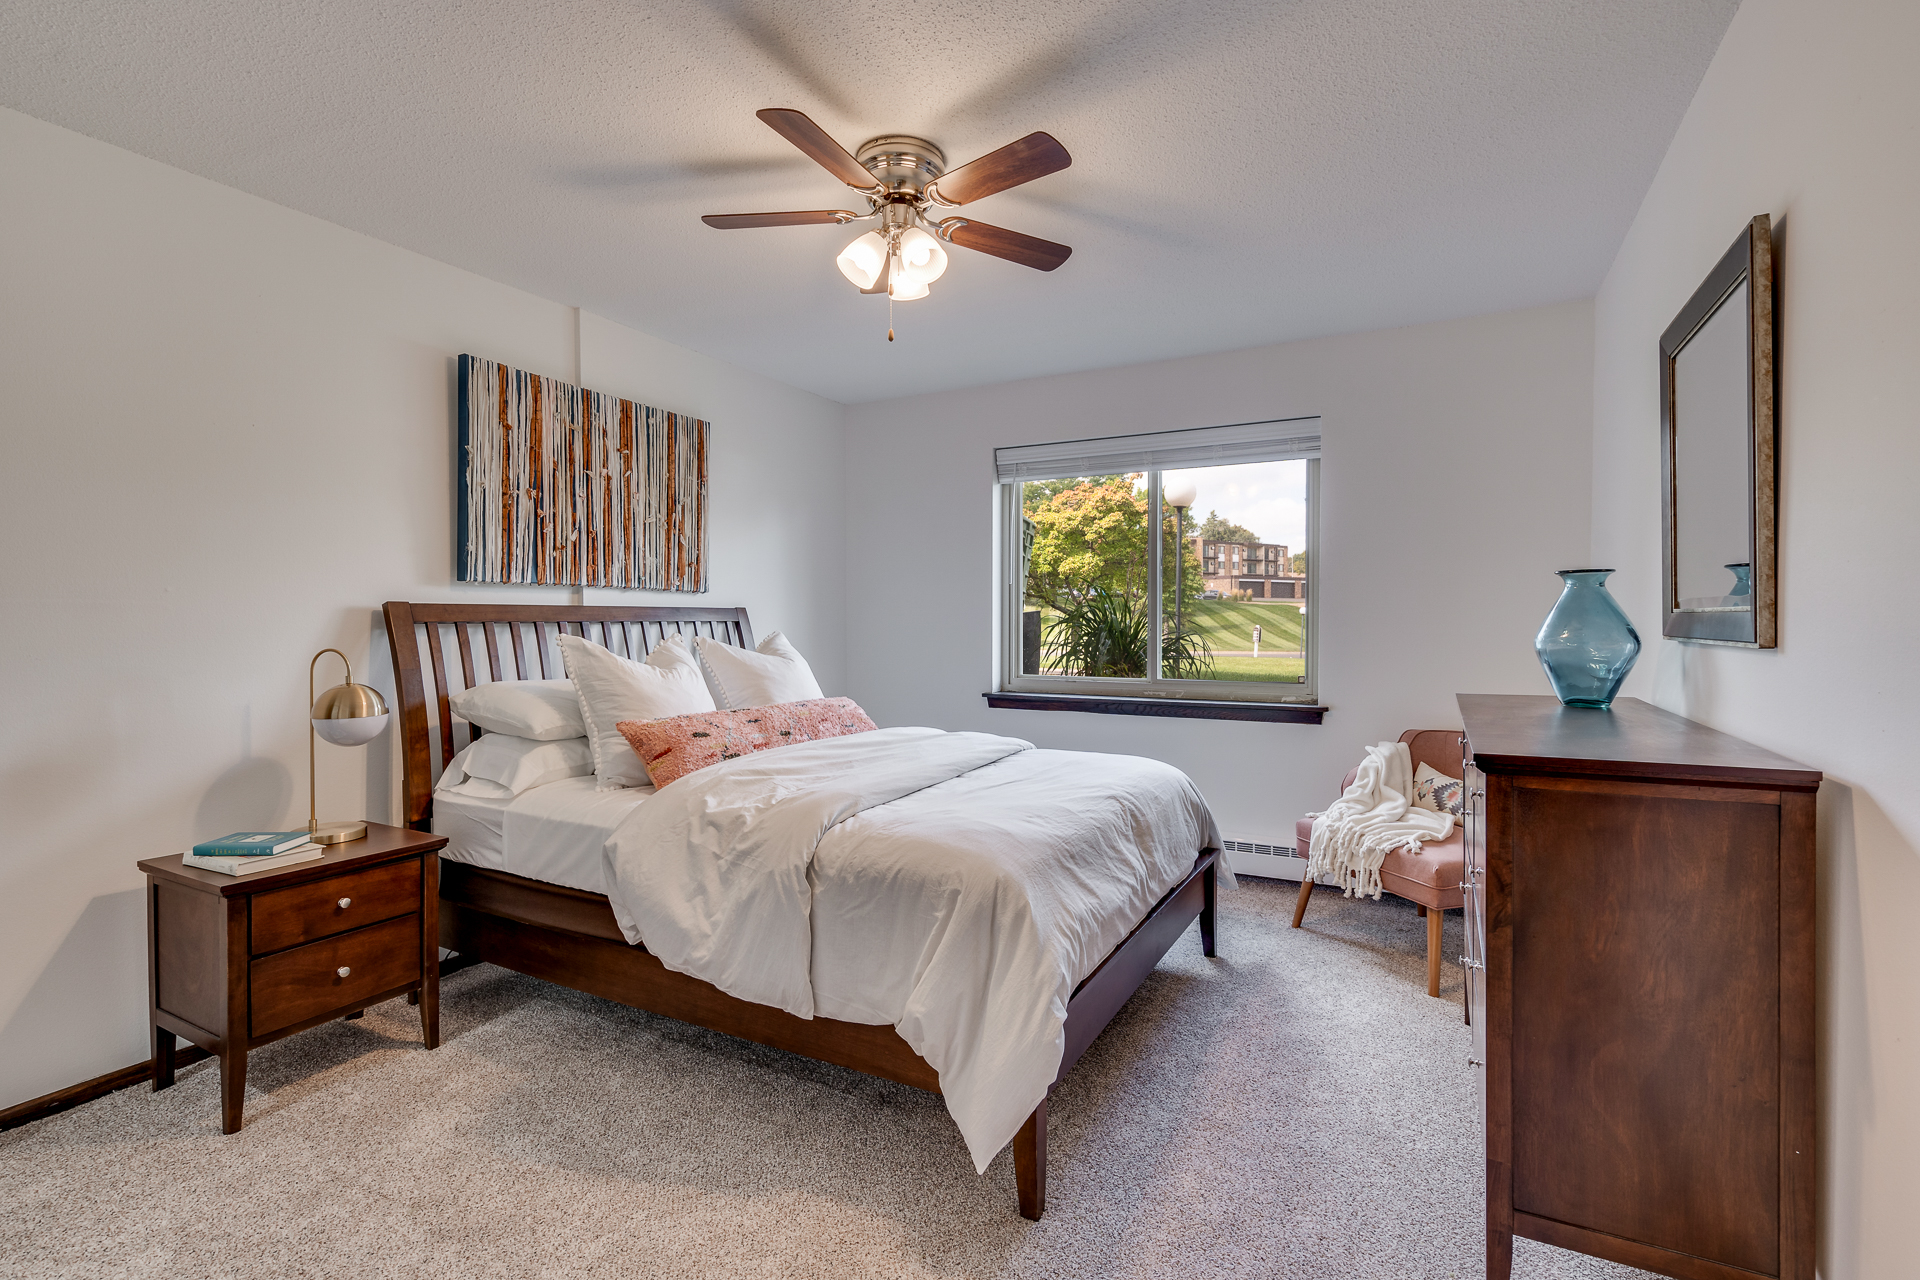 Carpeted Bedrooms At Sumter Green Apartments In Crystal, MN